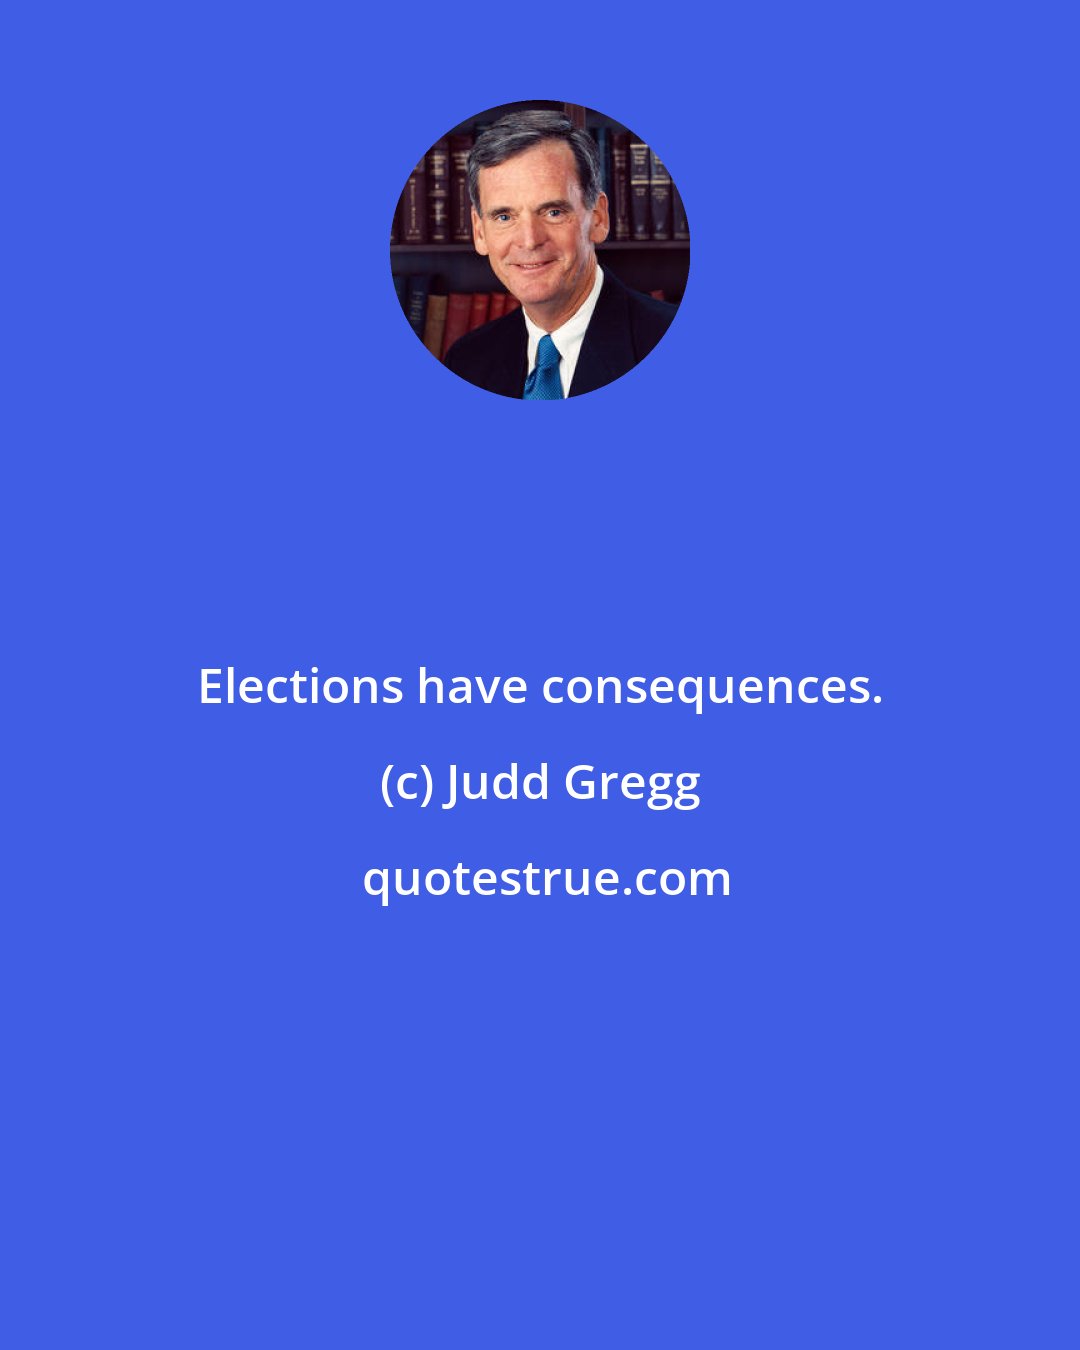 Judd Gregg: Elections have consequences.